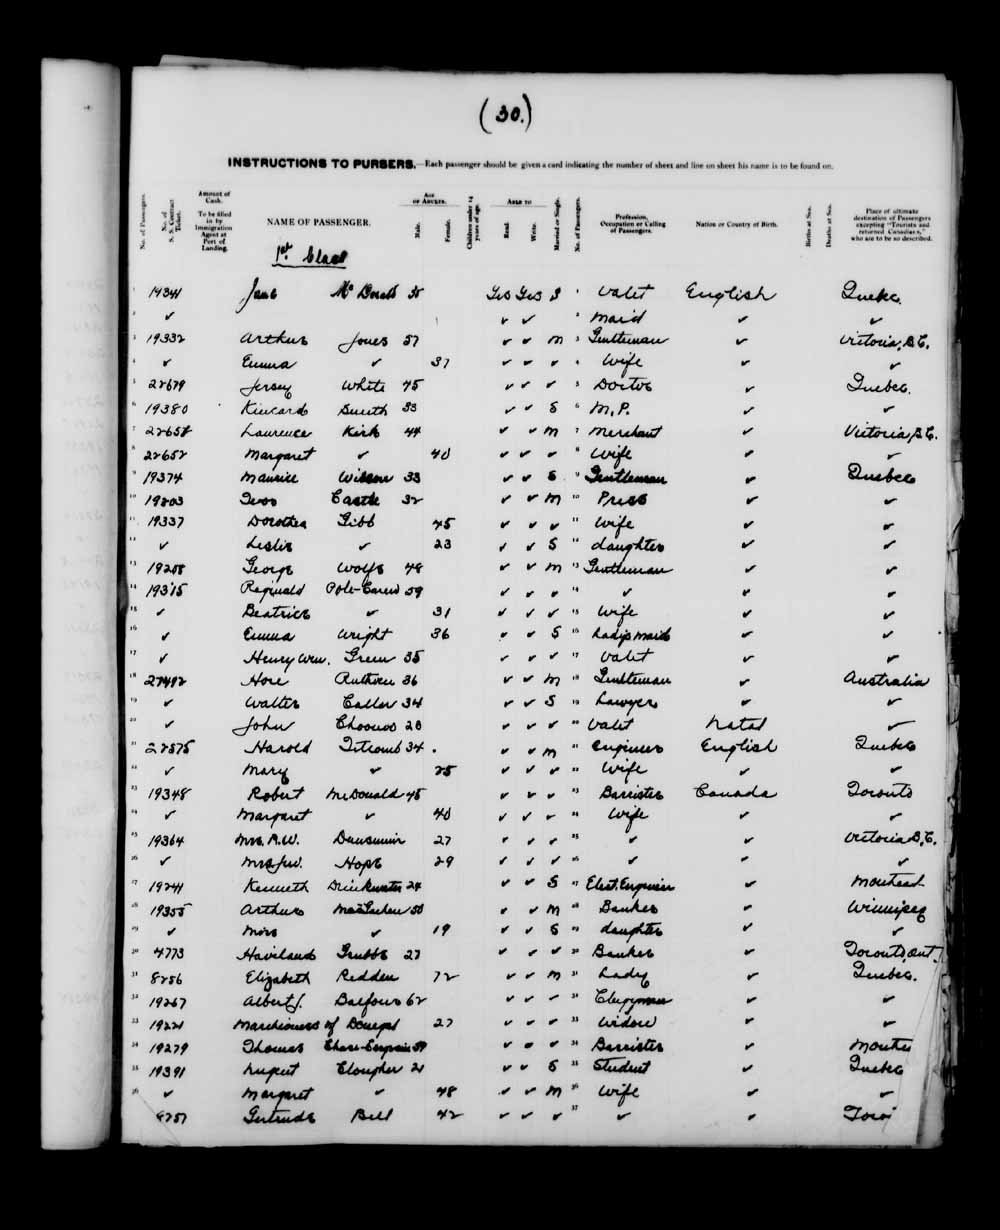 Digitized page of Quebec Passenger Lists for Image No.: e003591281